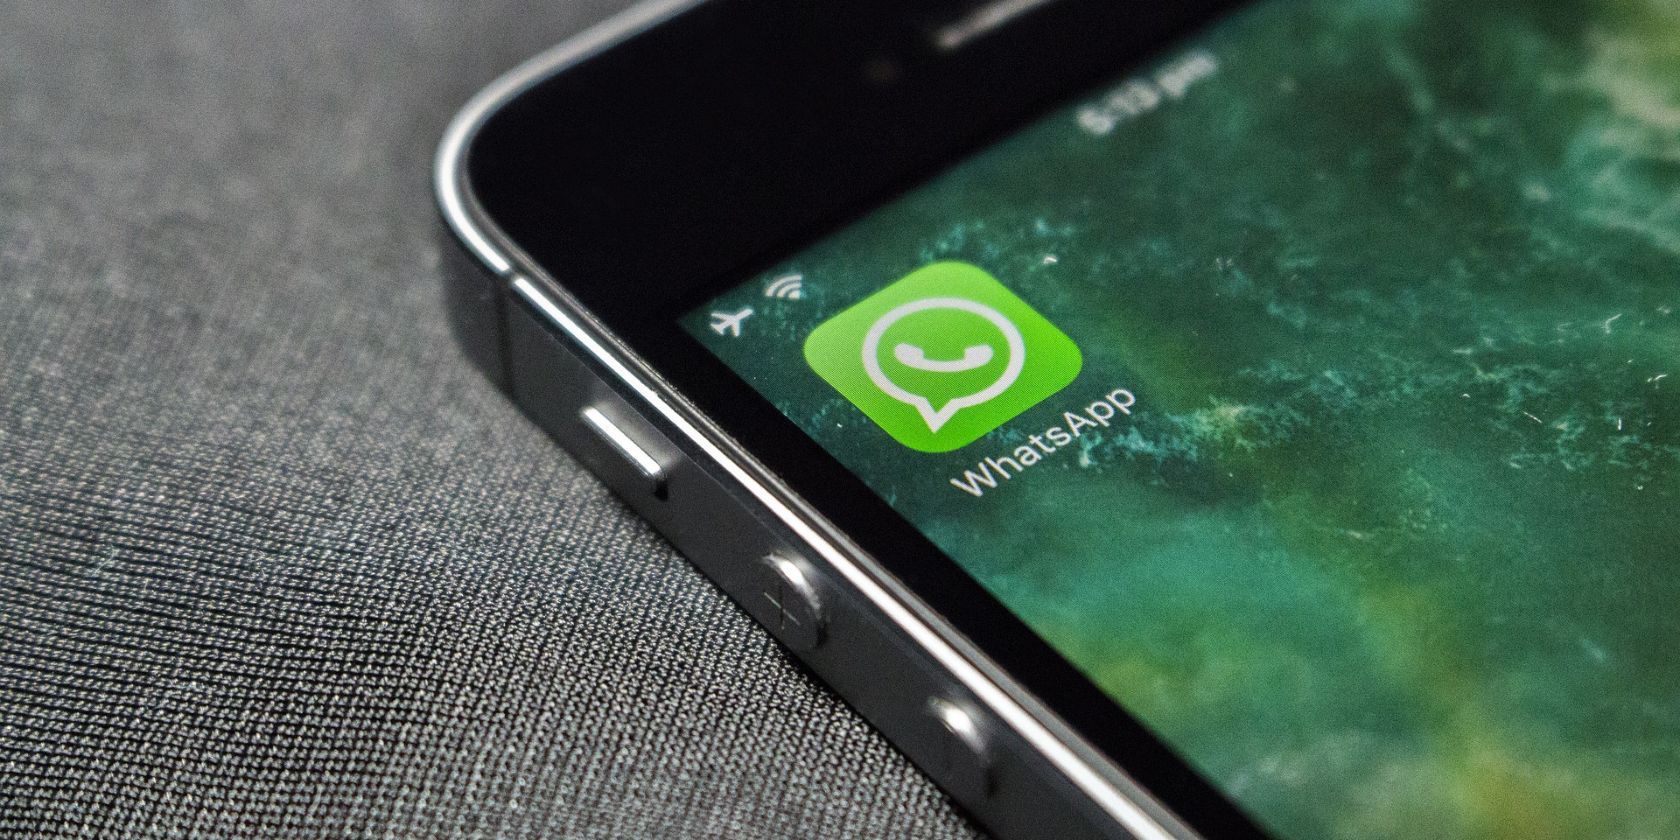 iMessage vs WhatsApp: Which is better?